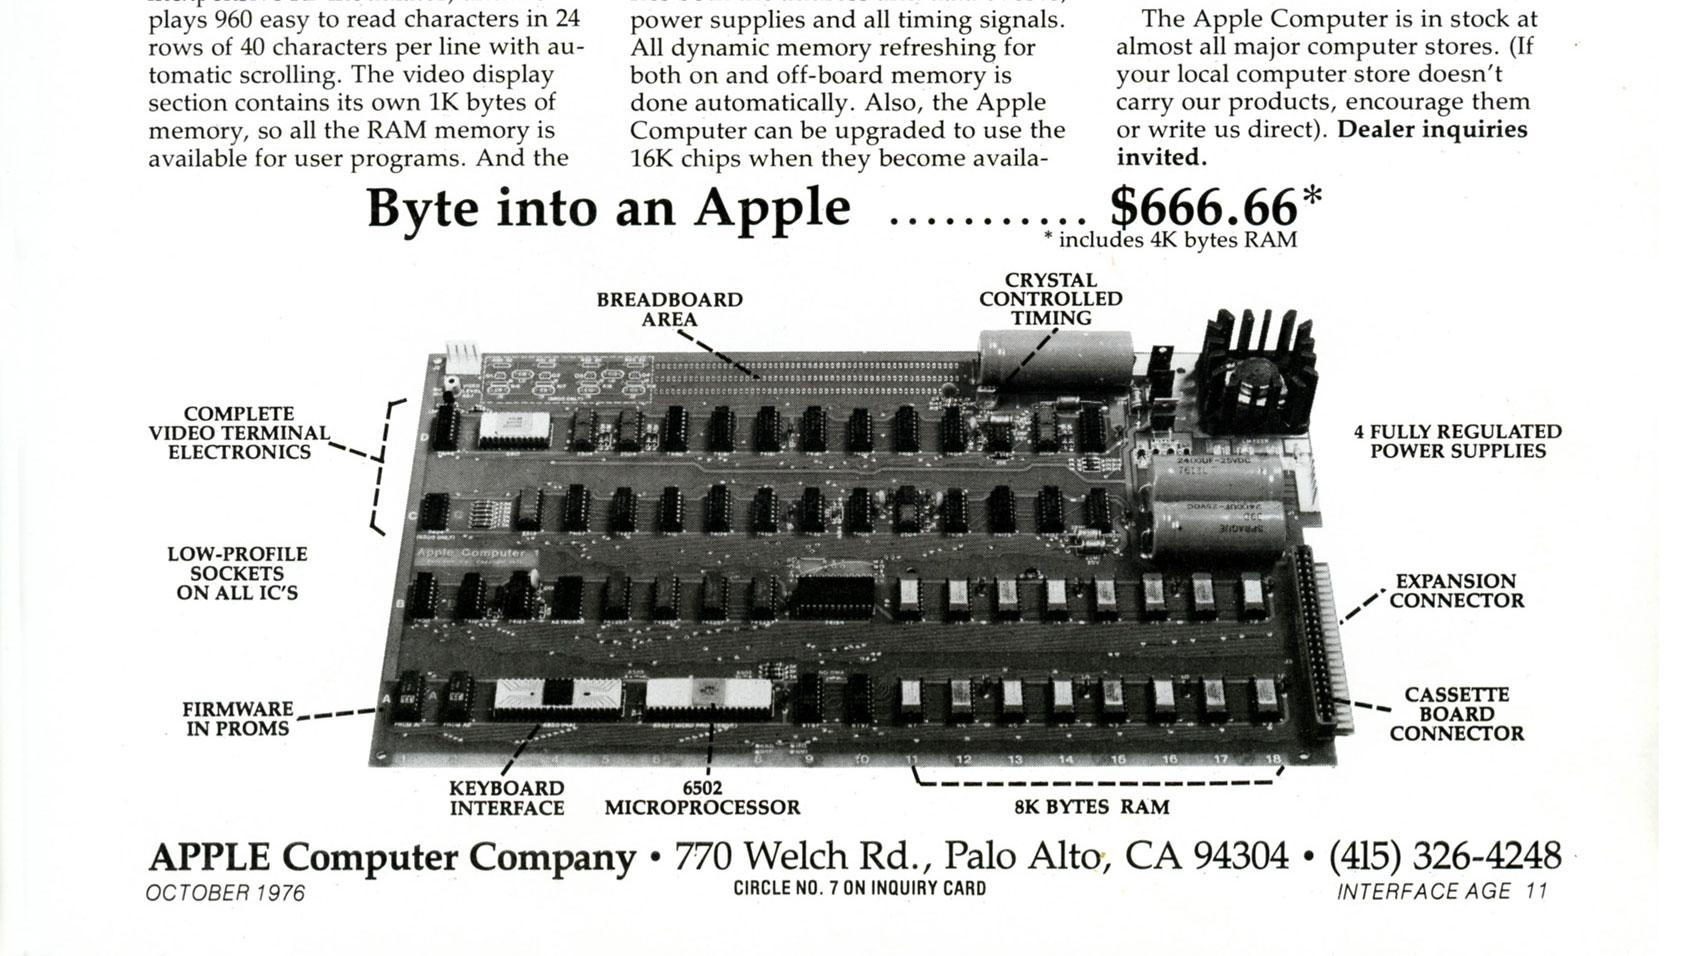 Apple advertisement from 1976